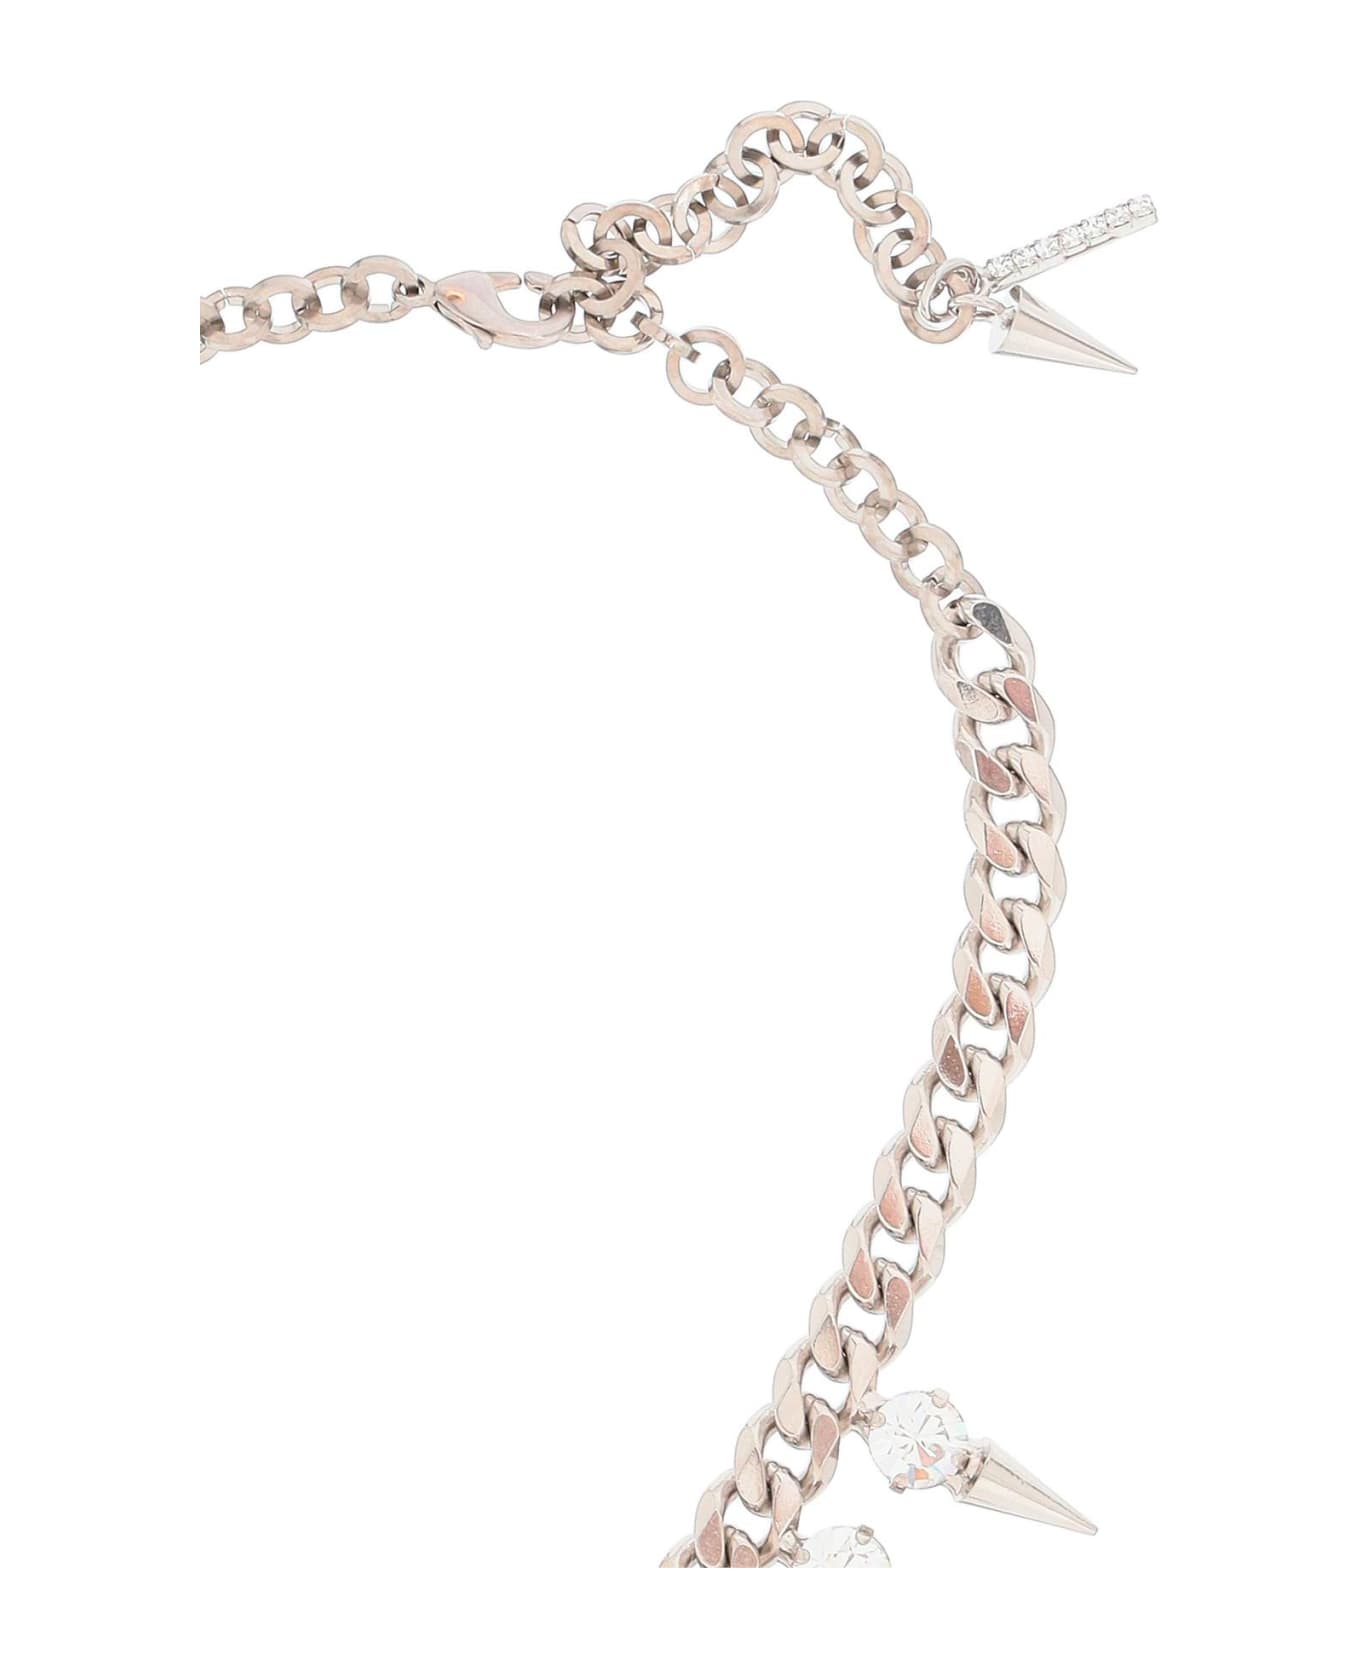 Alessandra Rich Choker With Crystals And Spikes - CRYSTAL SILVER (Silver)